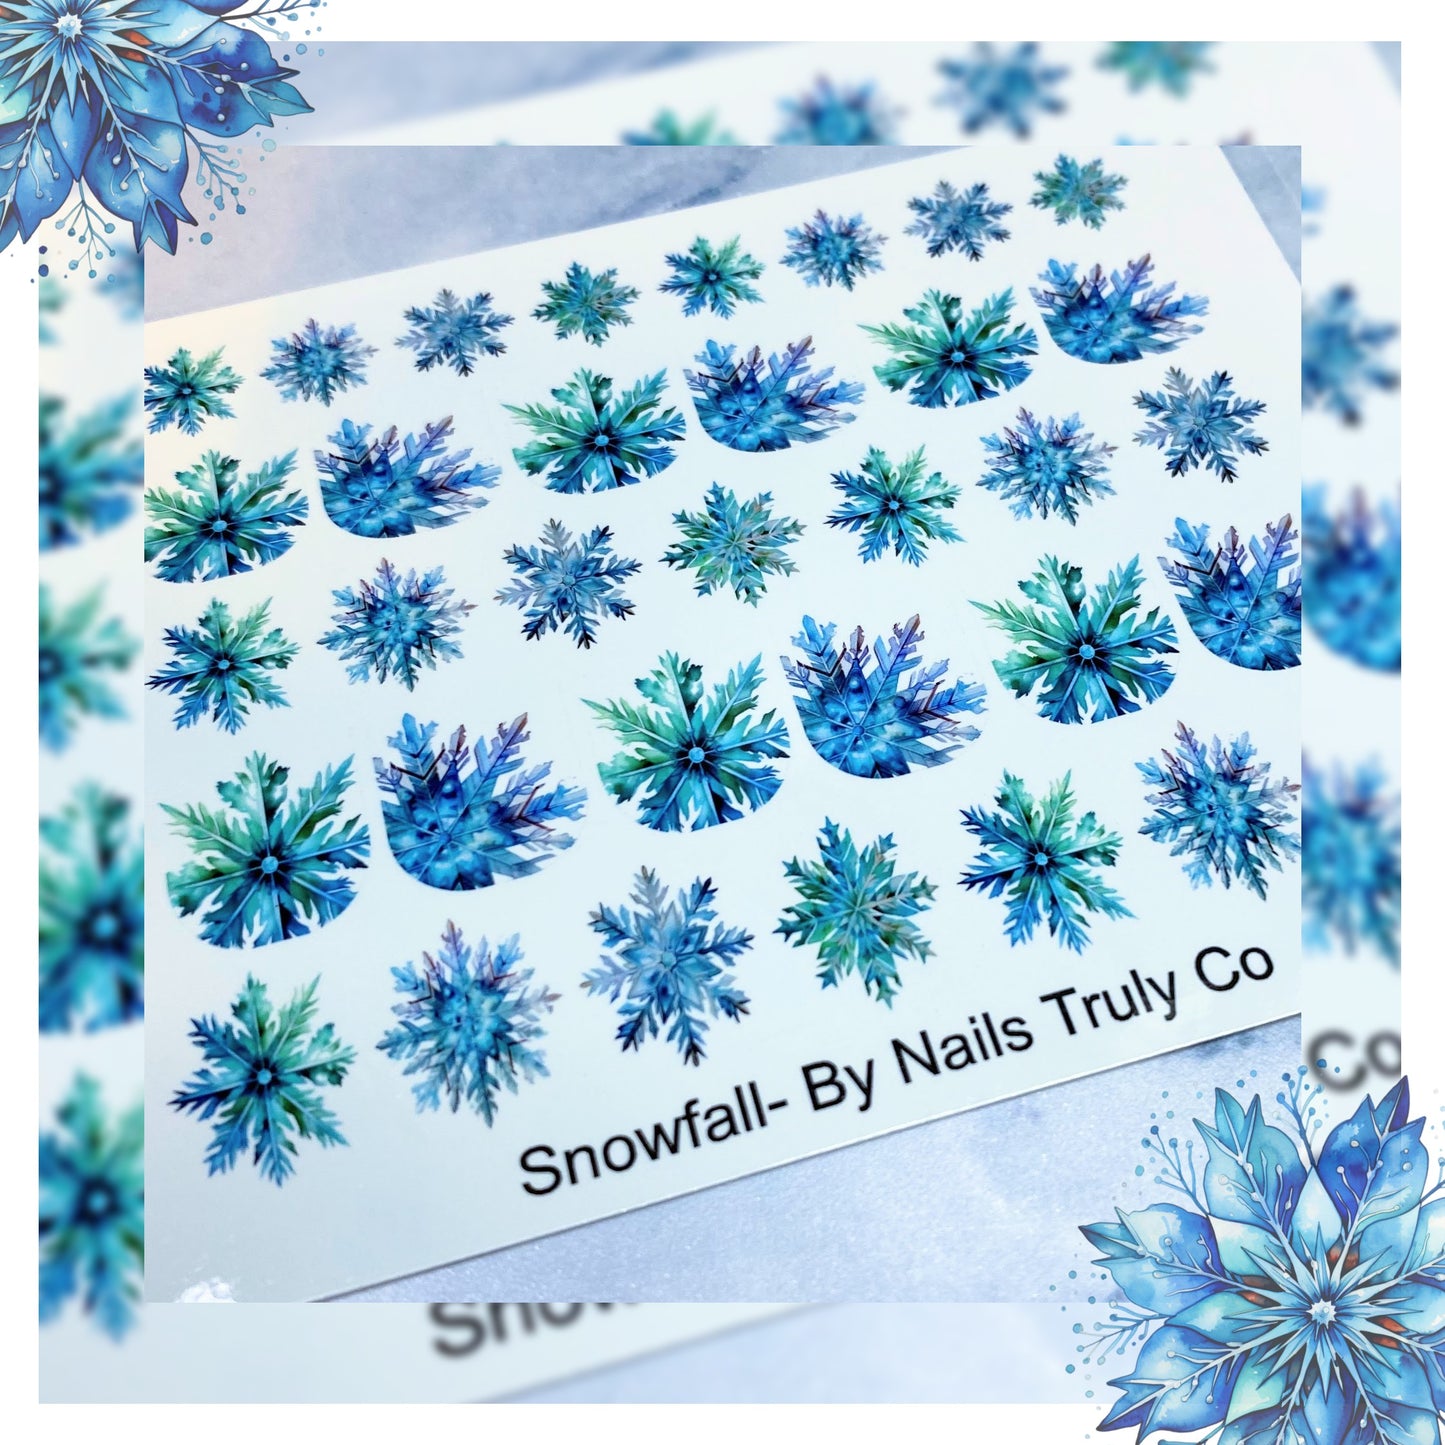 Snowfall - Snowflake Decals For Nails